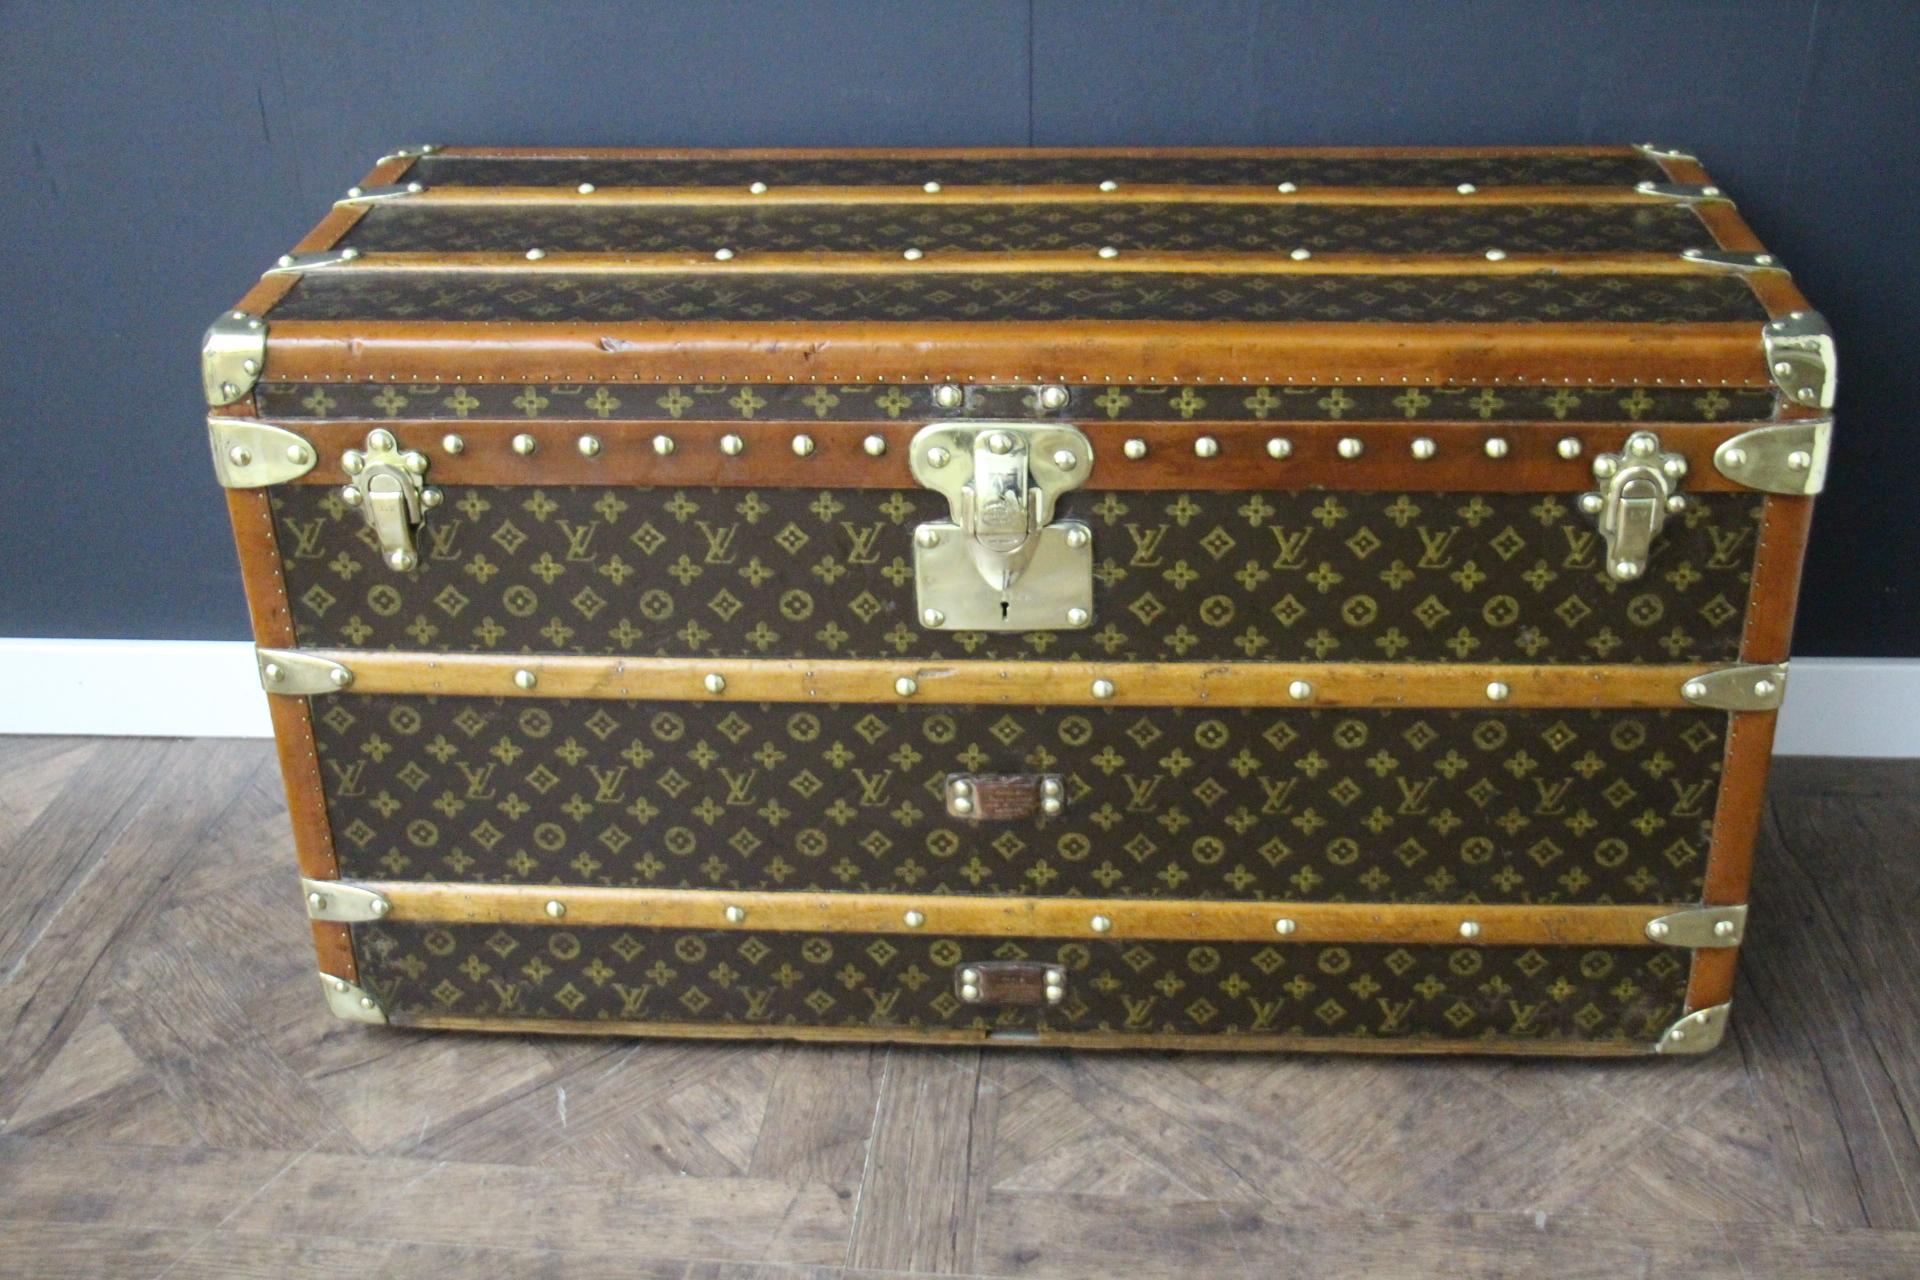 This magnificent Louis Vuitton shoe trunk features stenciled canvas monogram, Louis Vuitton stamped solid brass locks, brass studs and leather side handles. This Vuitton trunk also has got a magnificent honey color lozine trim.
Its hand painted